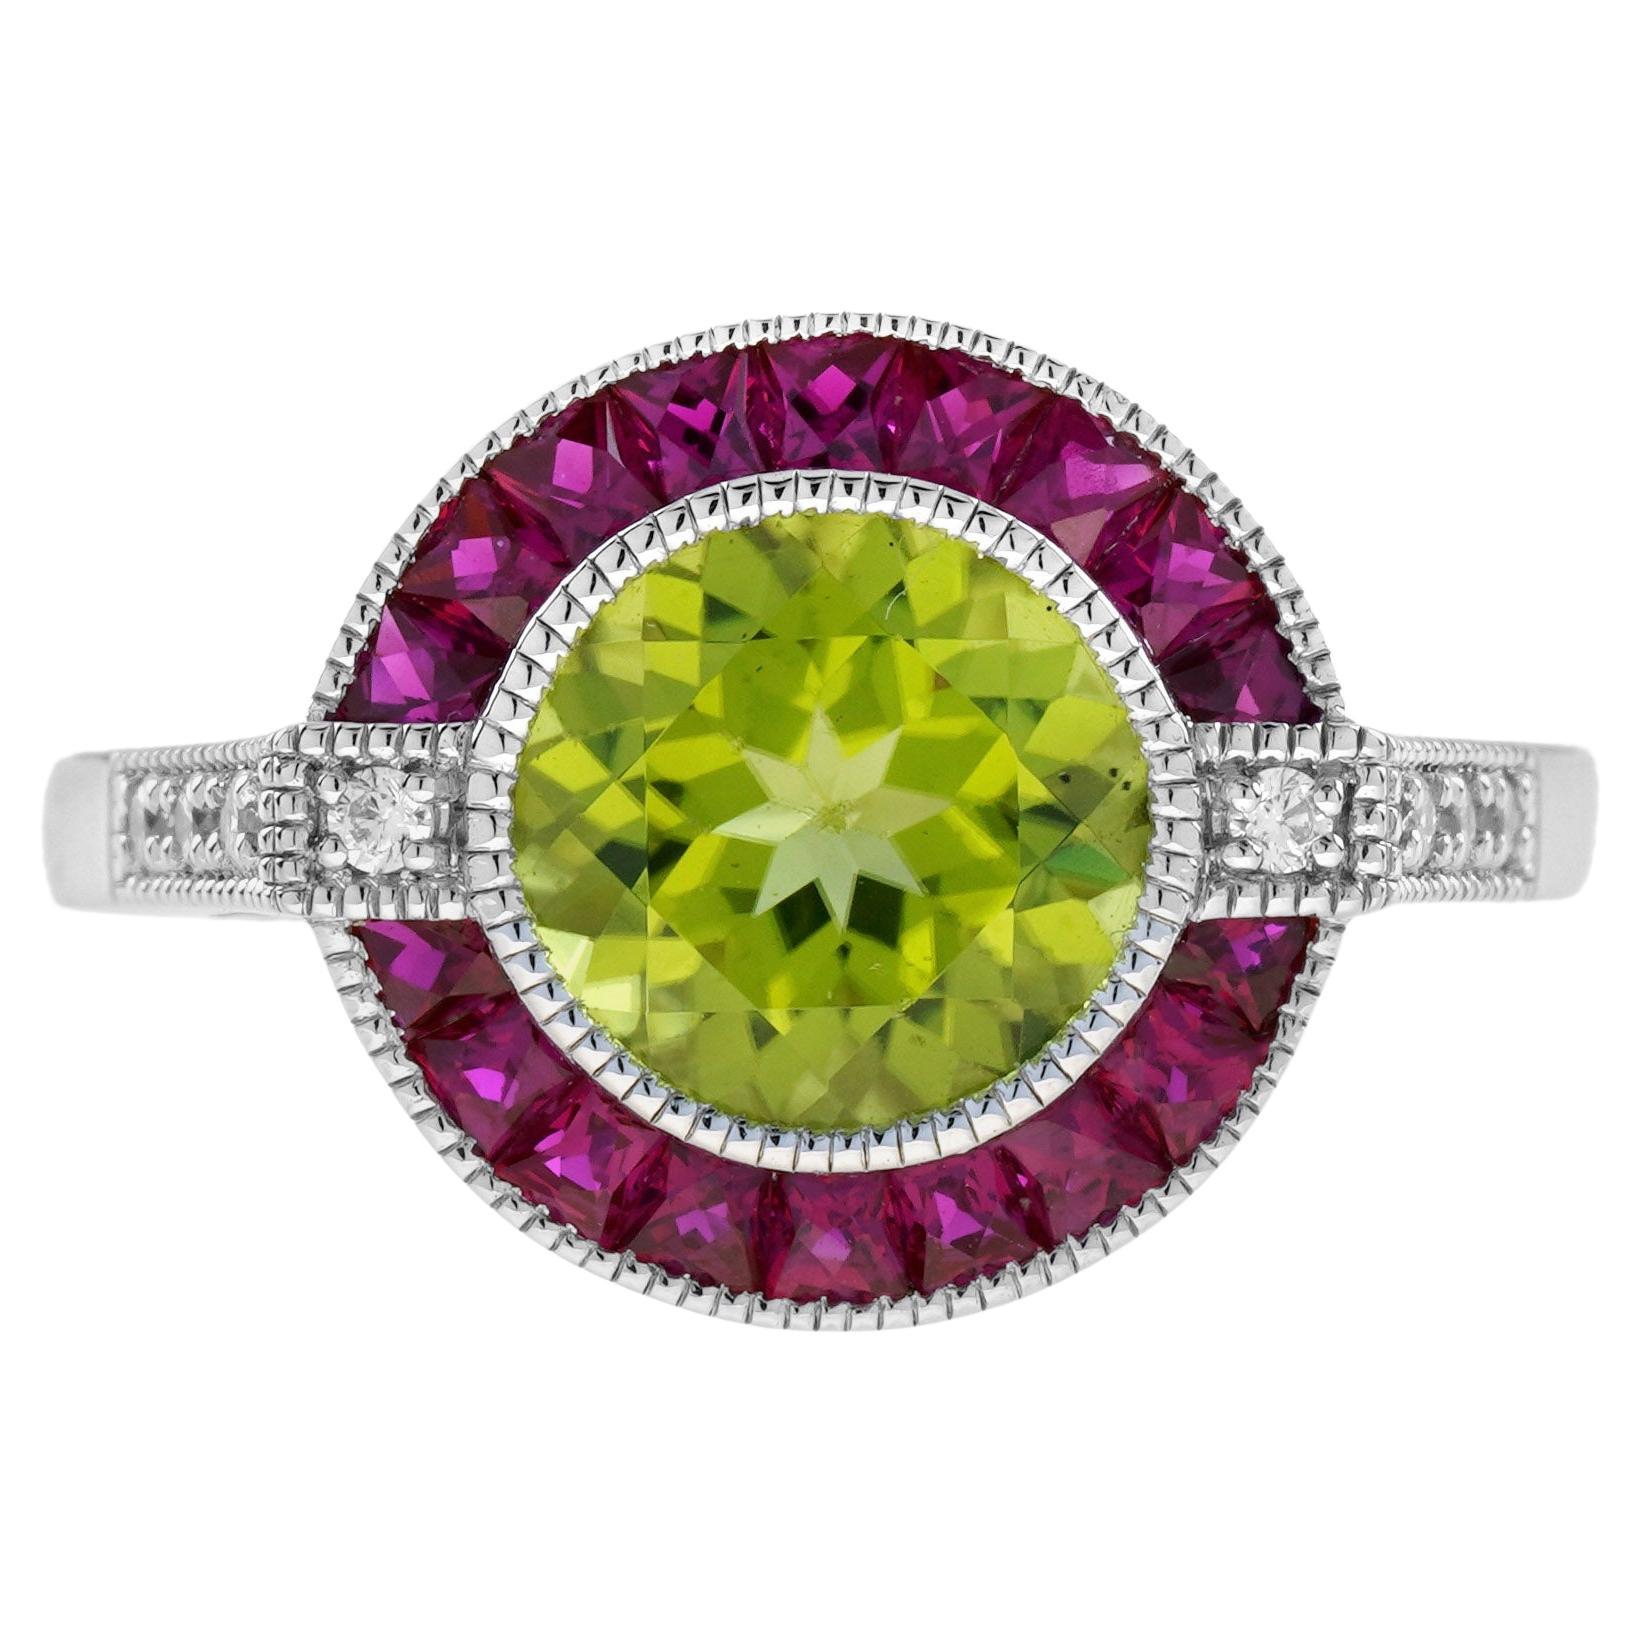 For Sale:  Peridot Ruby Diamond Art Deco Style Celebrate Target Ring in 14K White Gold